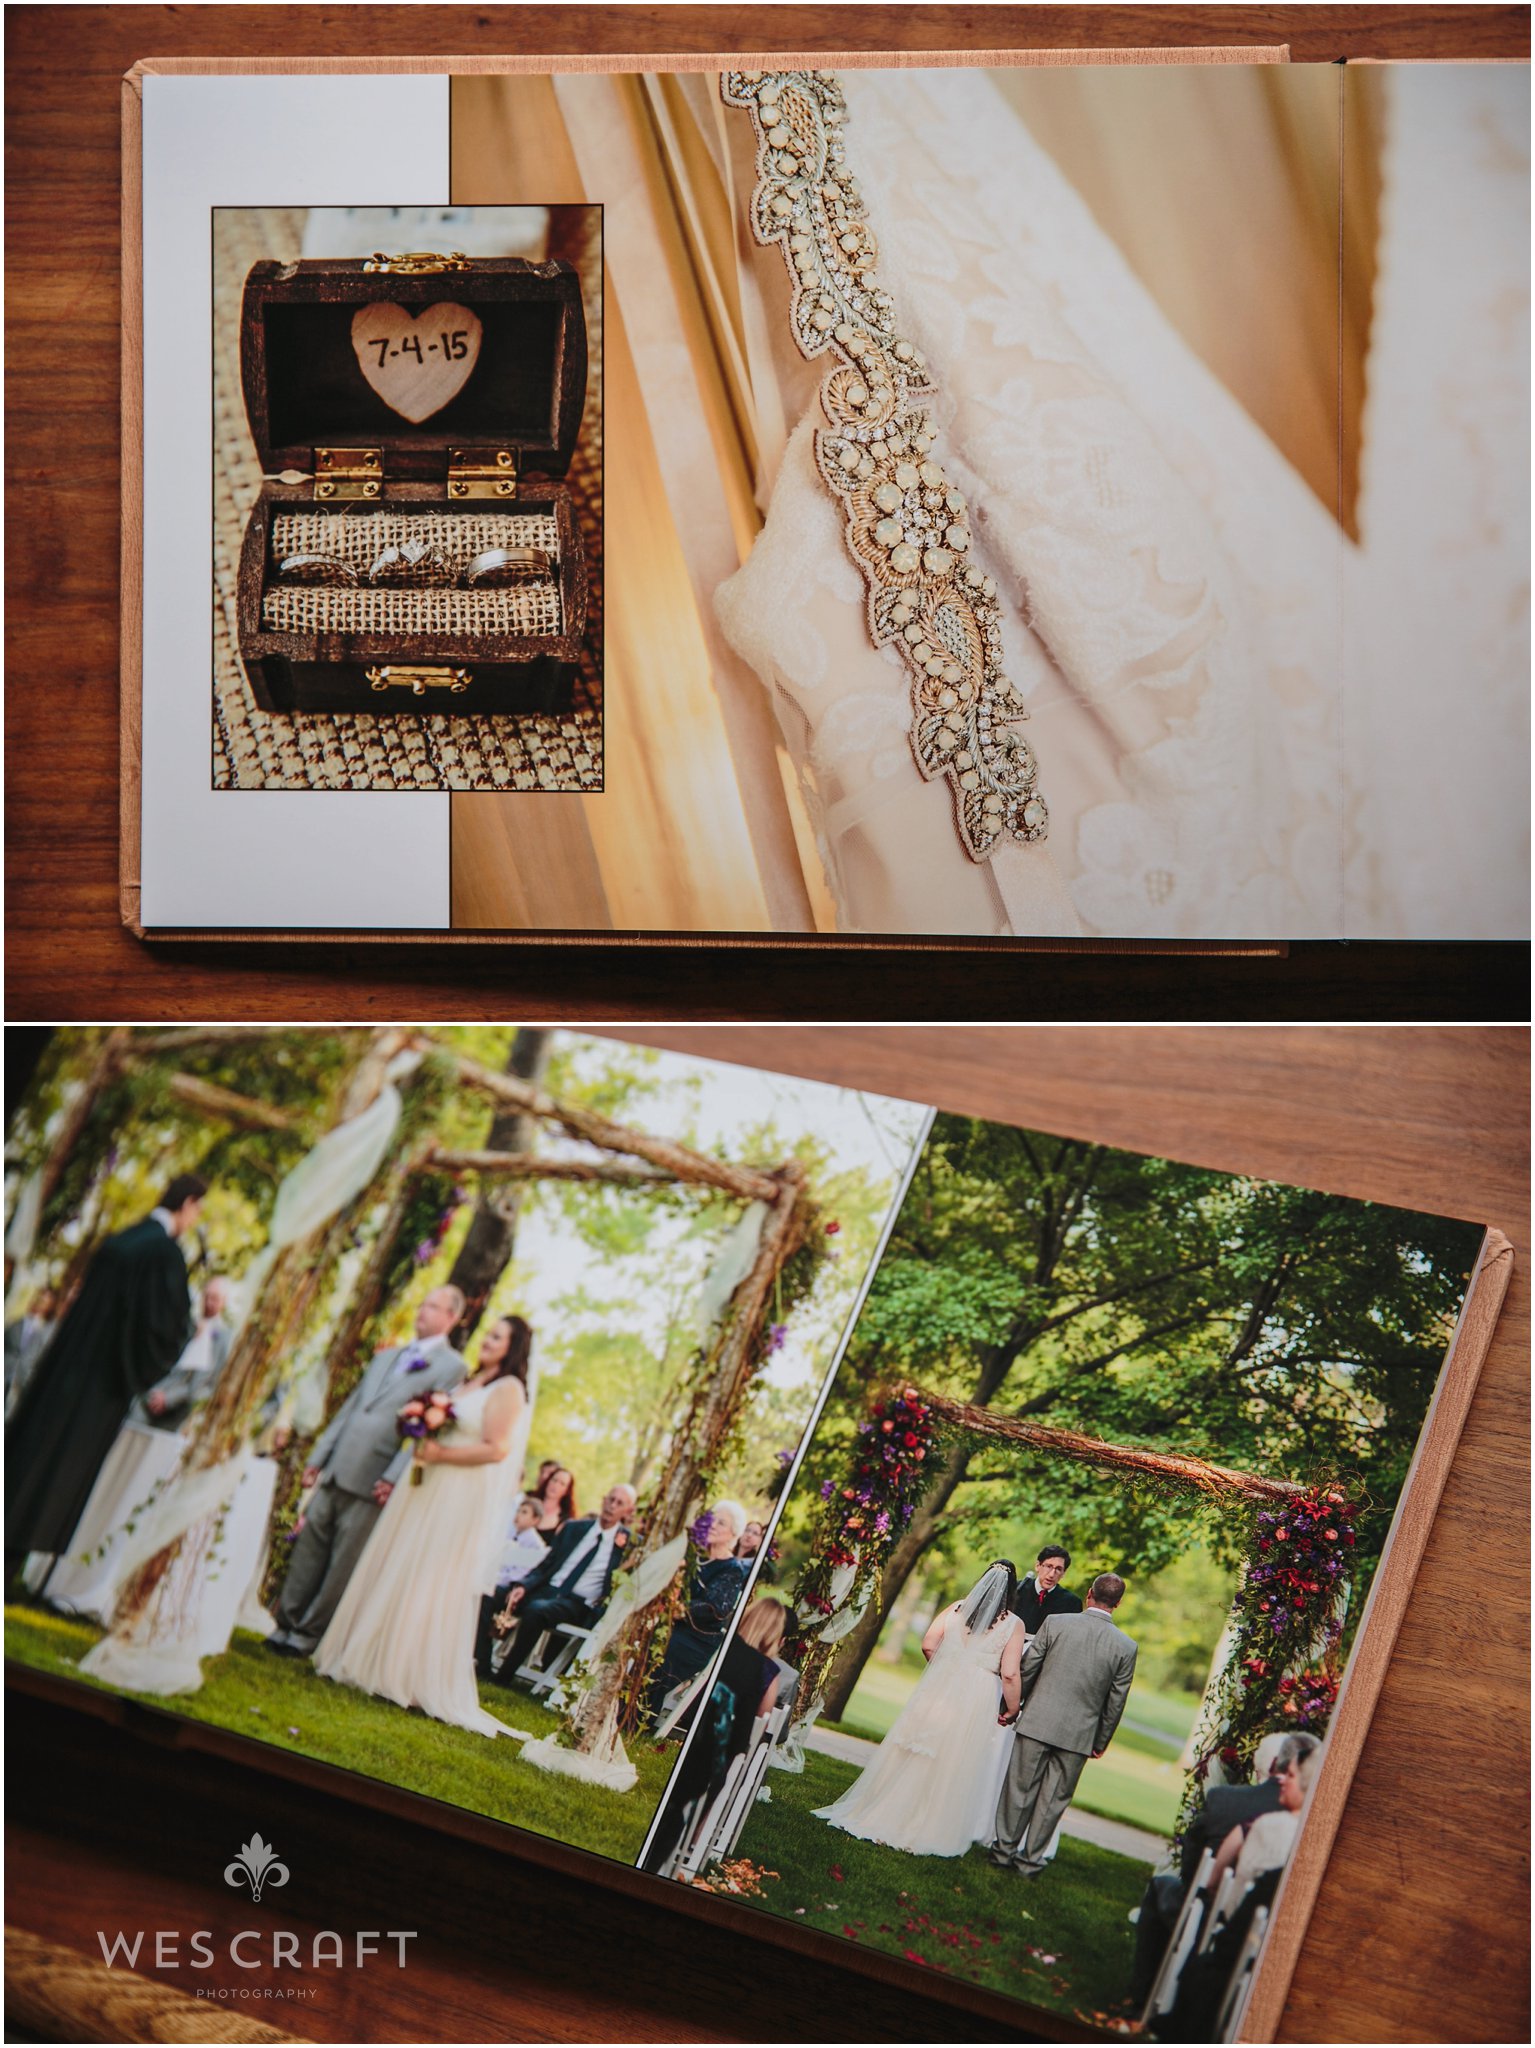 The wedding had rustic touches like a chuppah made of branches and wedding details from Etsy and BHLDN.